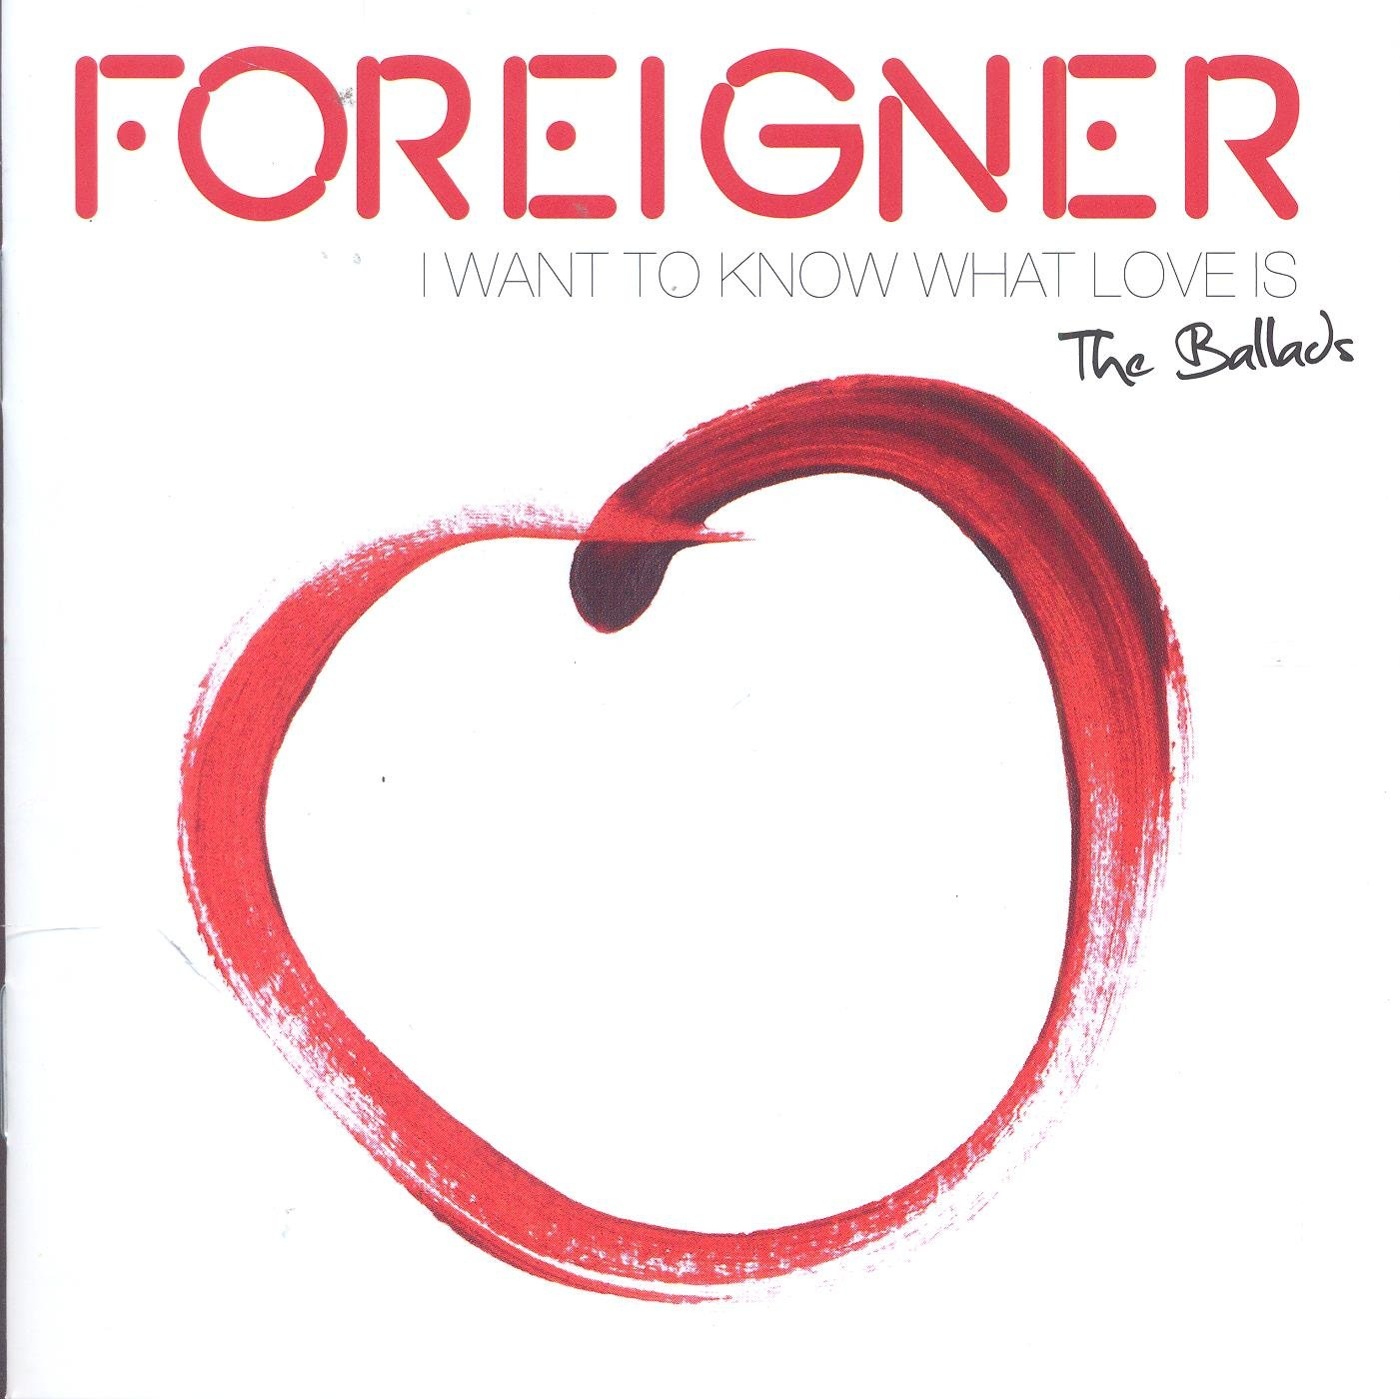 Want to know the name. Foreigner - i want to know what Love is. Foreigner 1977. Foreigner - i want to know what Love is фото. I want to know.